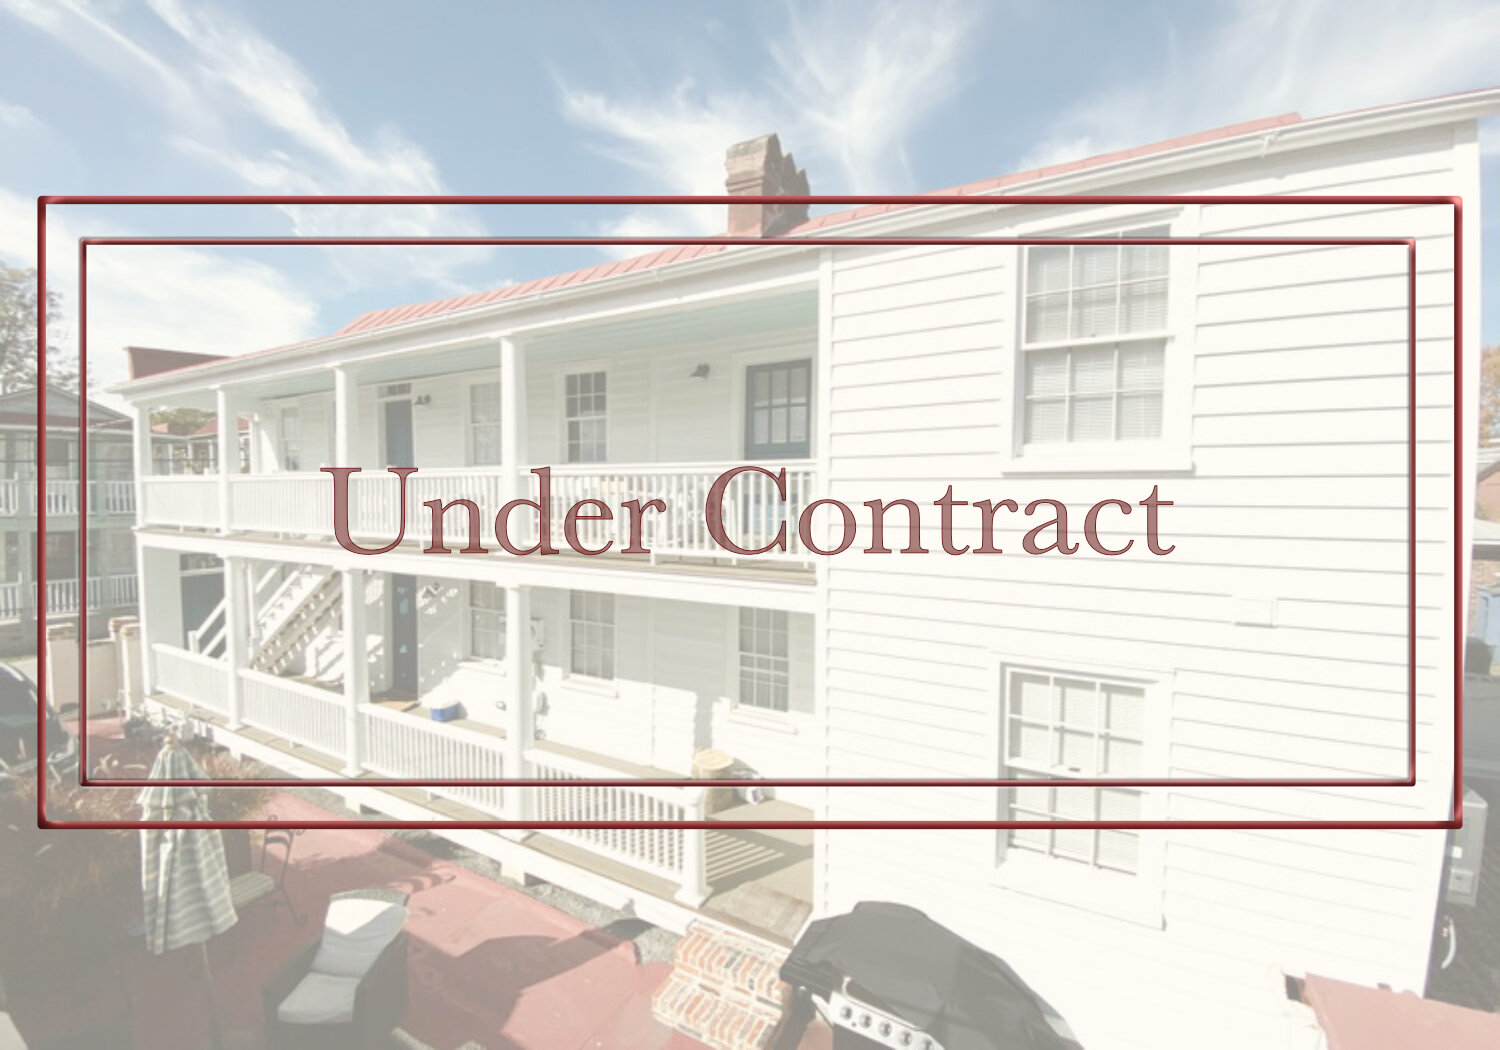 under contract 2 rose .jpg